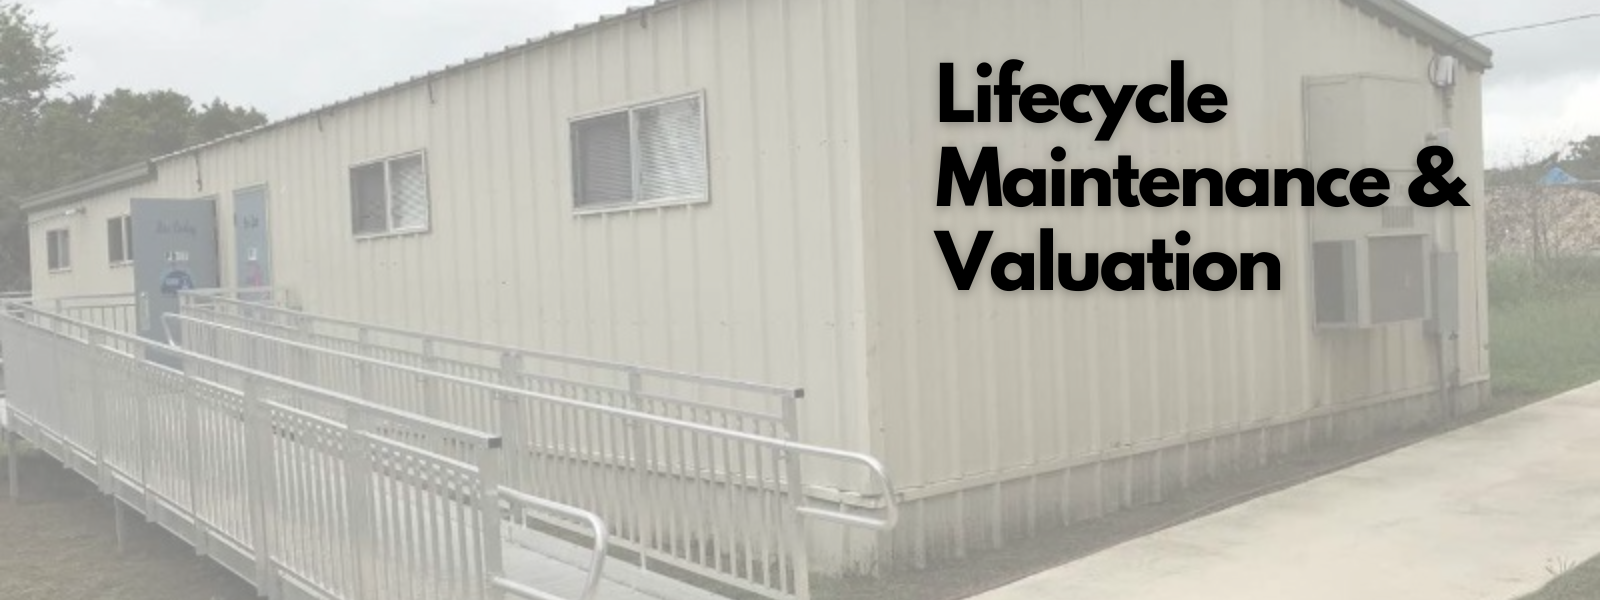 Modular buildings and portable classrooms can last for 25-30 years if maintained properly